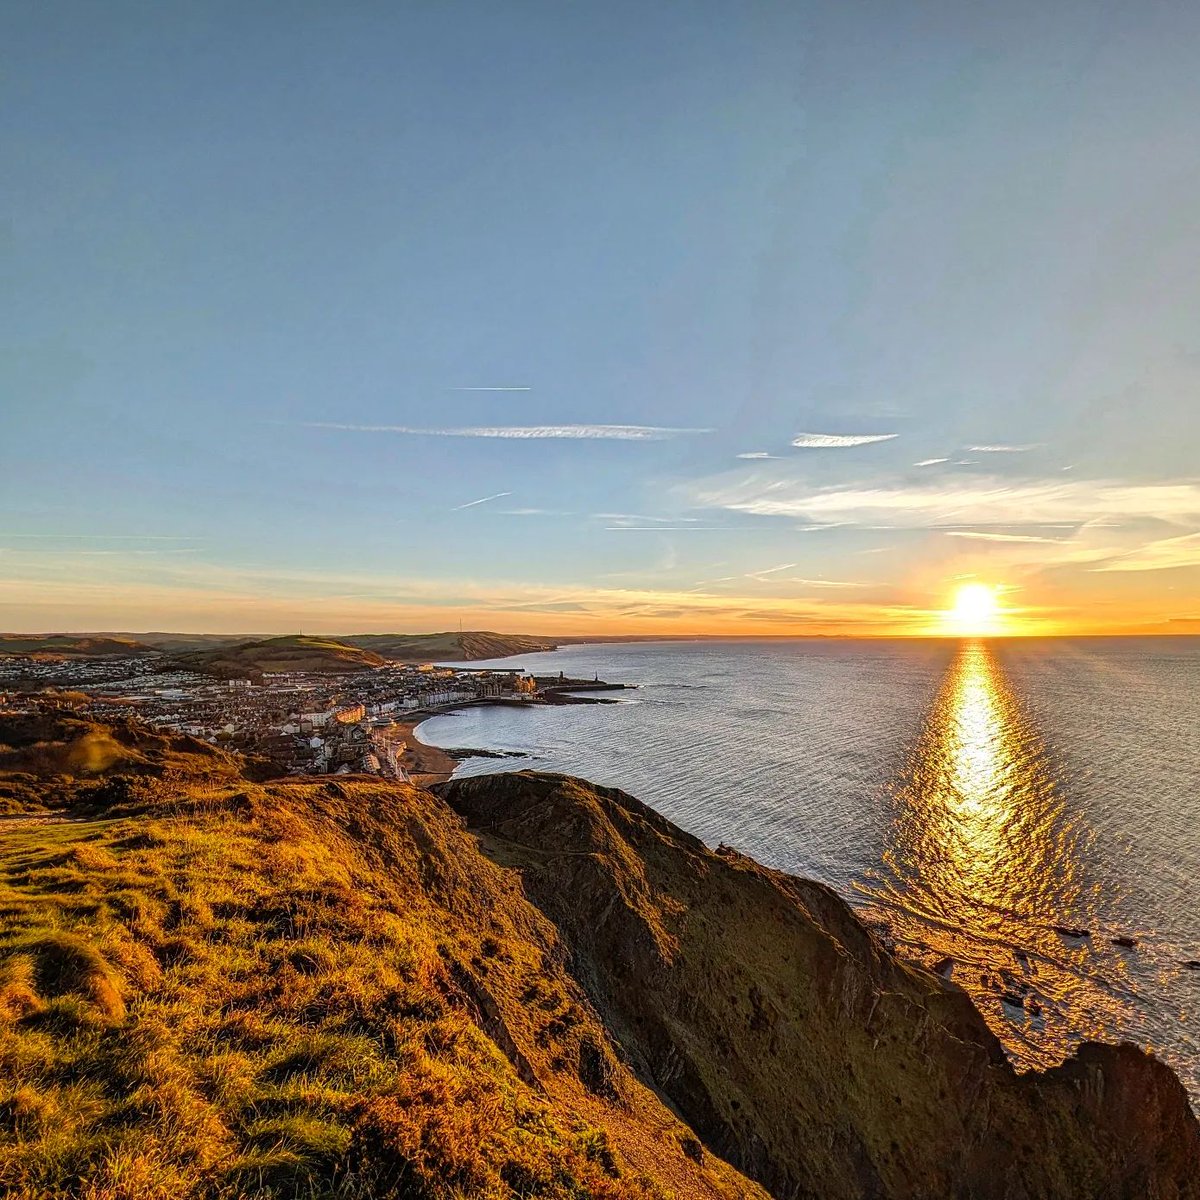 We agree 📷@joesjourneys92 - 'Aberystwyth sunsets are pretty damn glorious' 😍 Thank you for sharing. #joesjourneys #aberystwyth #aberystwythseafront #midwales #ceredigion #vsiitmidwales #visitwales